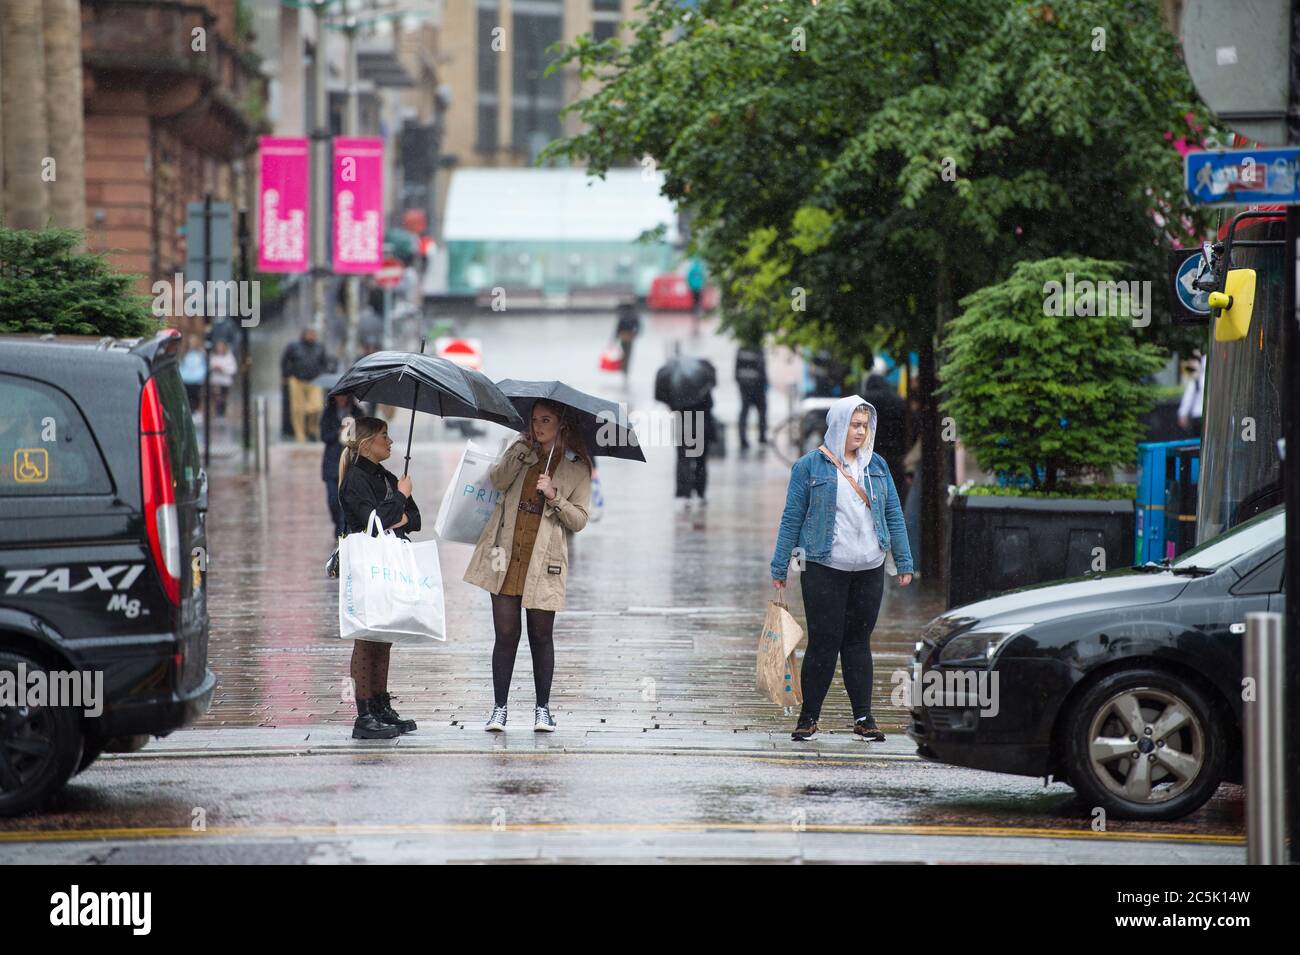 Glasgow, Scotland, UK. 3rd July, 2020. Pictured: Buchanan Street shopping area with shoppers braving the pouring rain using umbrellas and face coverings which will become mandatory on 10th July next week. Credit: Colin Fisher/Alamy Live News Stock Photo